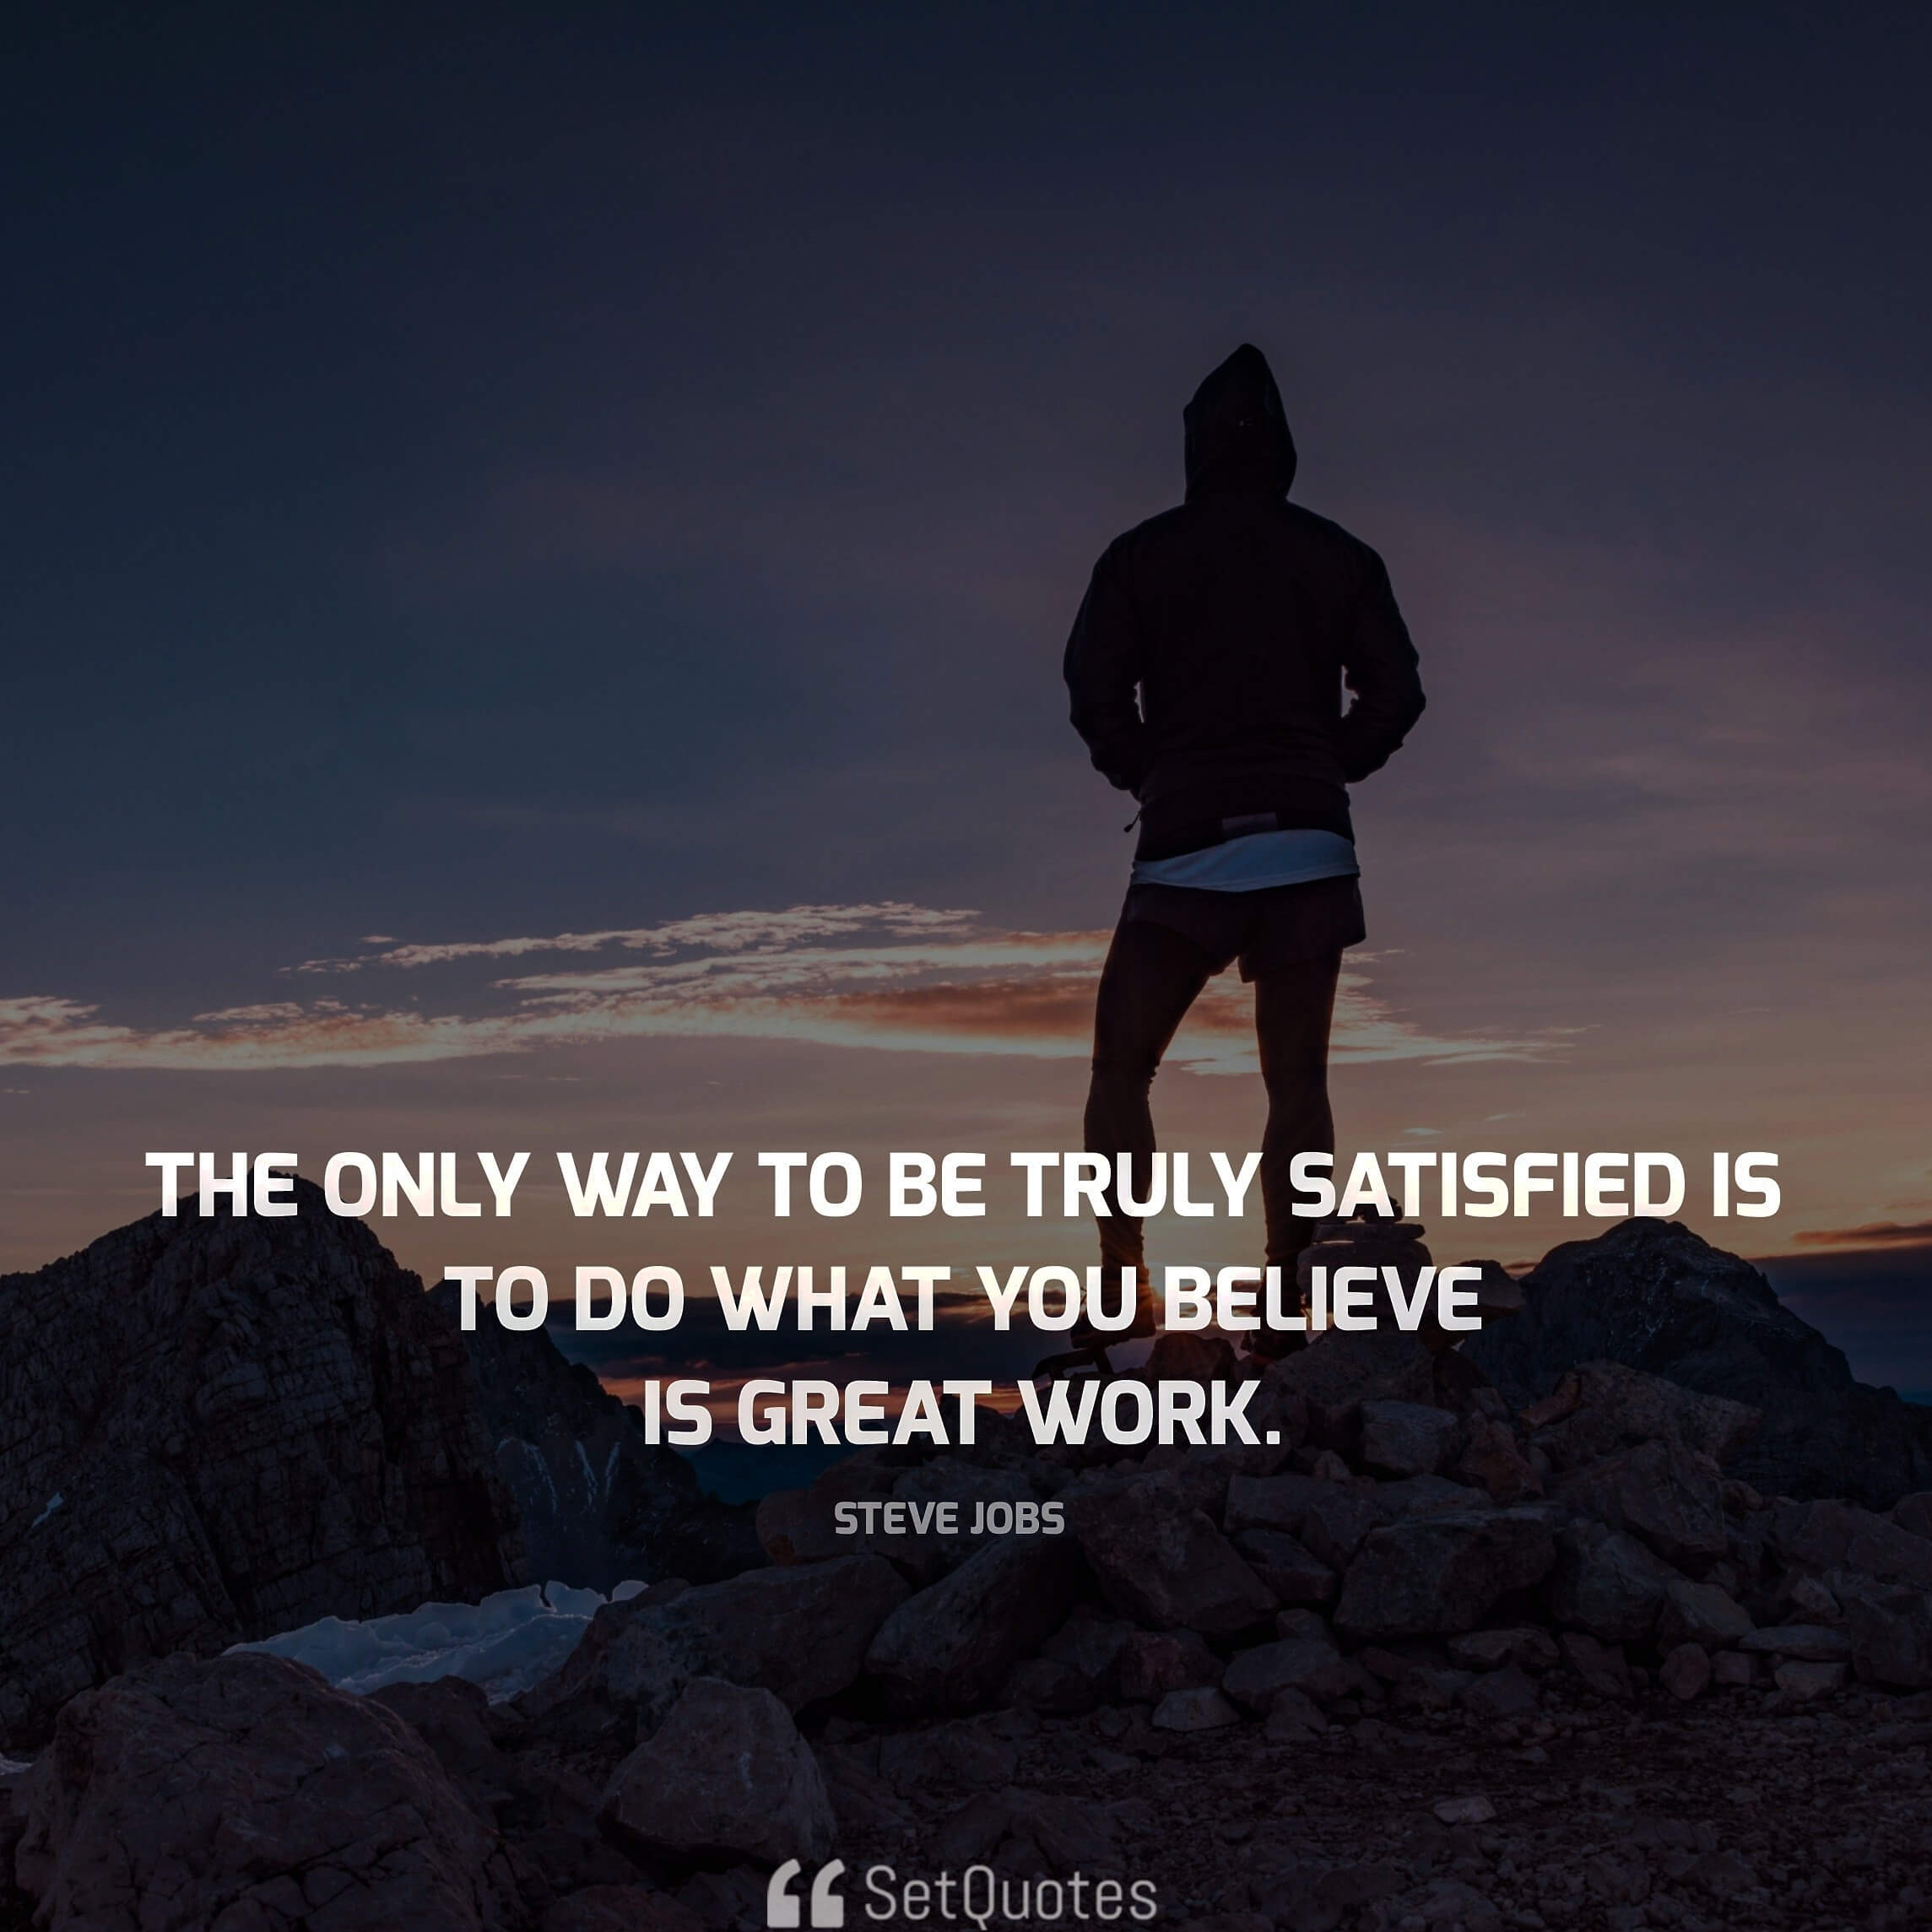 The only way to be truly satisfied is to do what you believe is great work. - steve jobs quotes